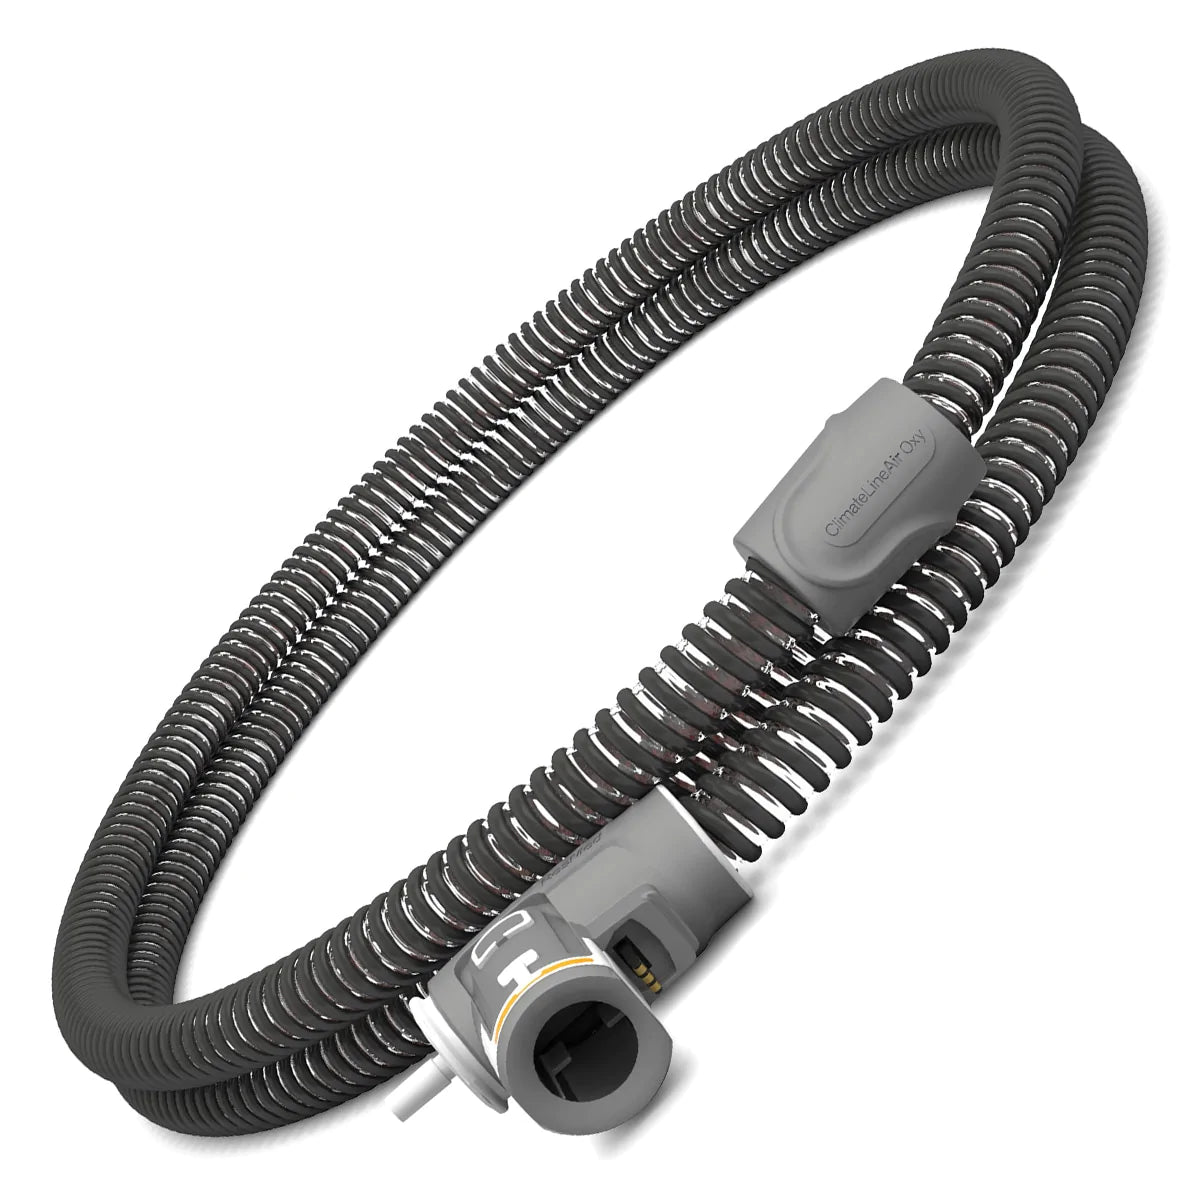 Embedded Wire Hose - CPAP Ventilation Tube